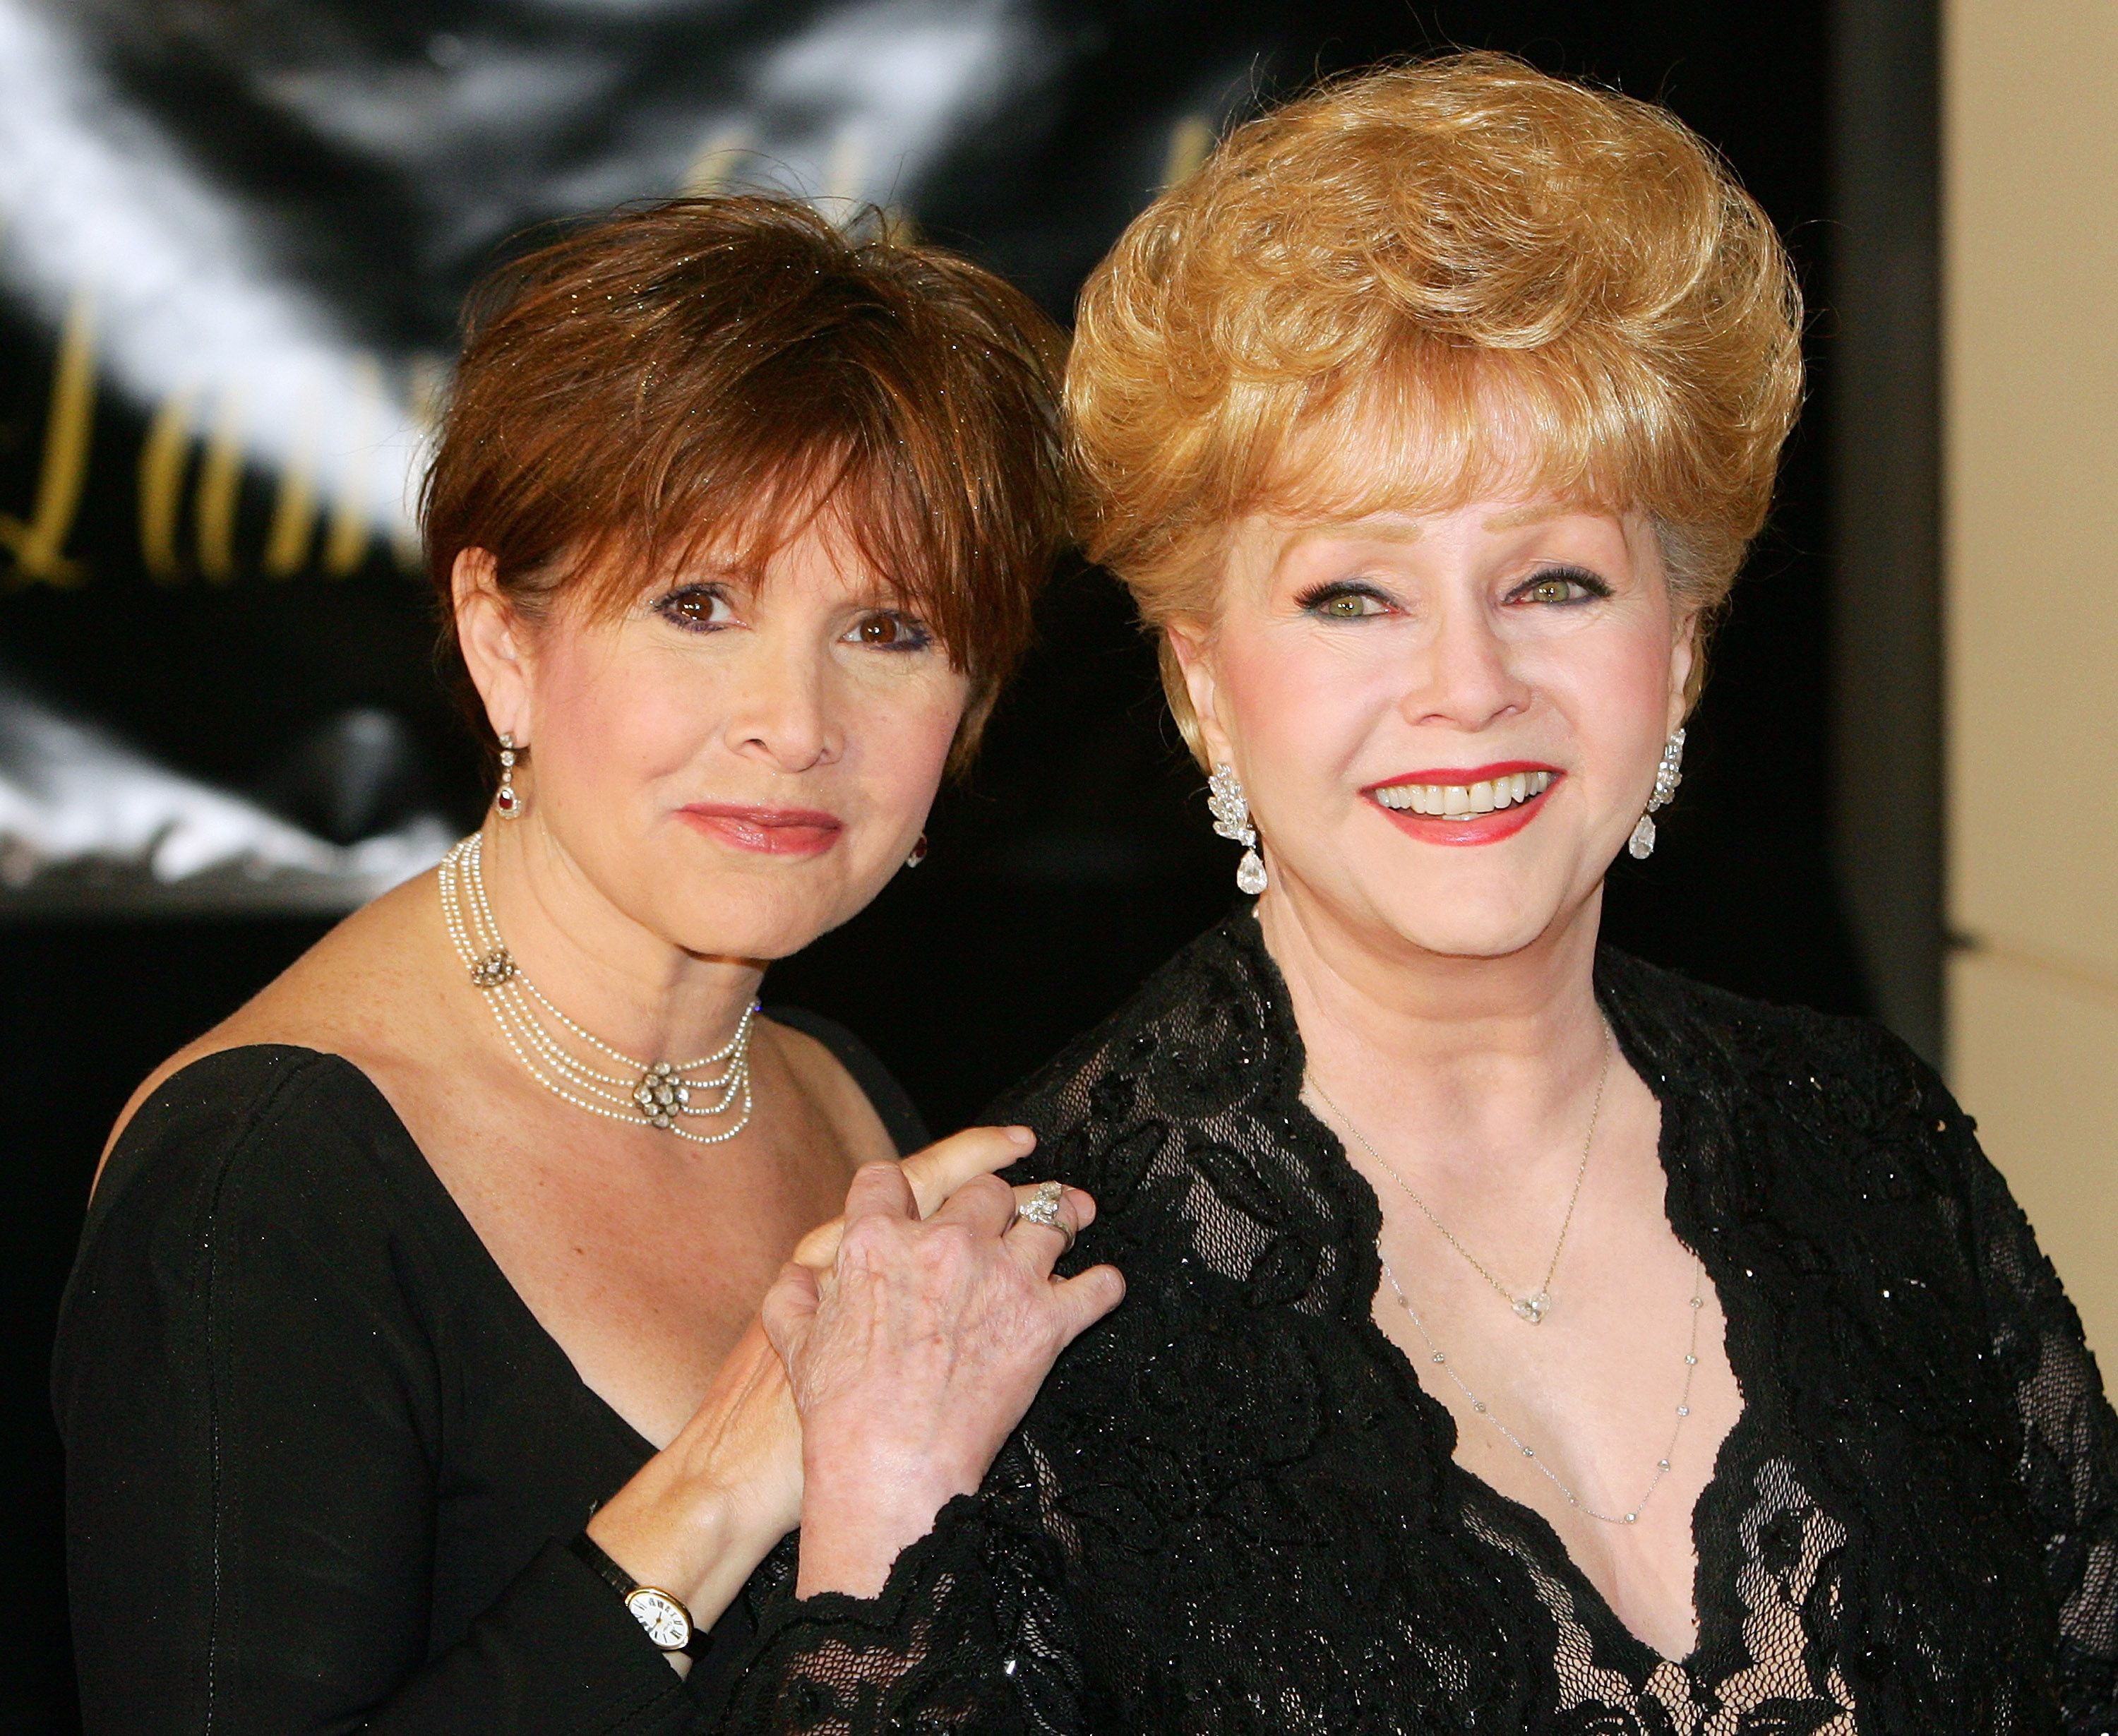 Actress Carrie Fisher and her mother, actress Debbie Reynolds, at Dame Elizabeth Taylor's 75th birthday party at the Ritz-Carlton, Lake Las Vegas on February 27, 2007 | Photo: Getty Images